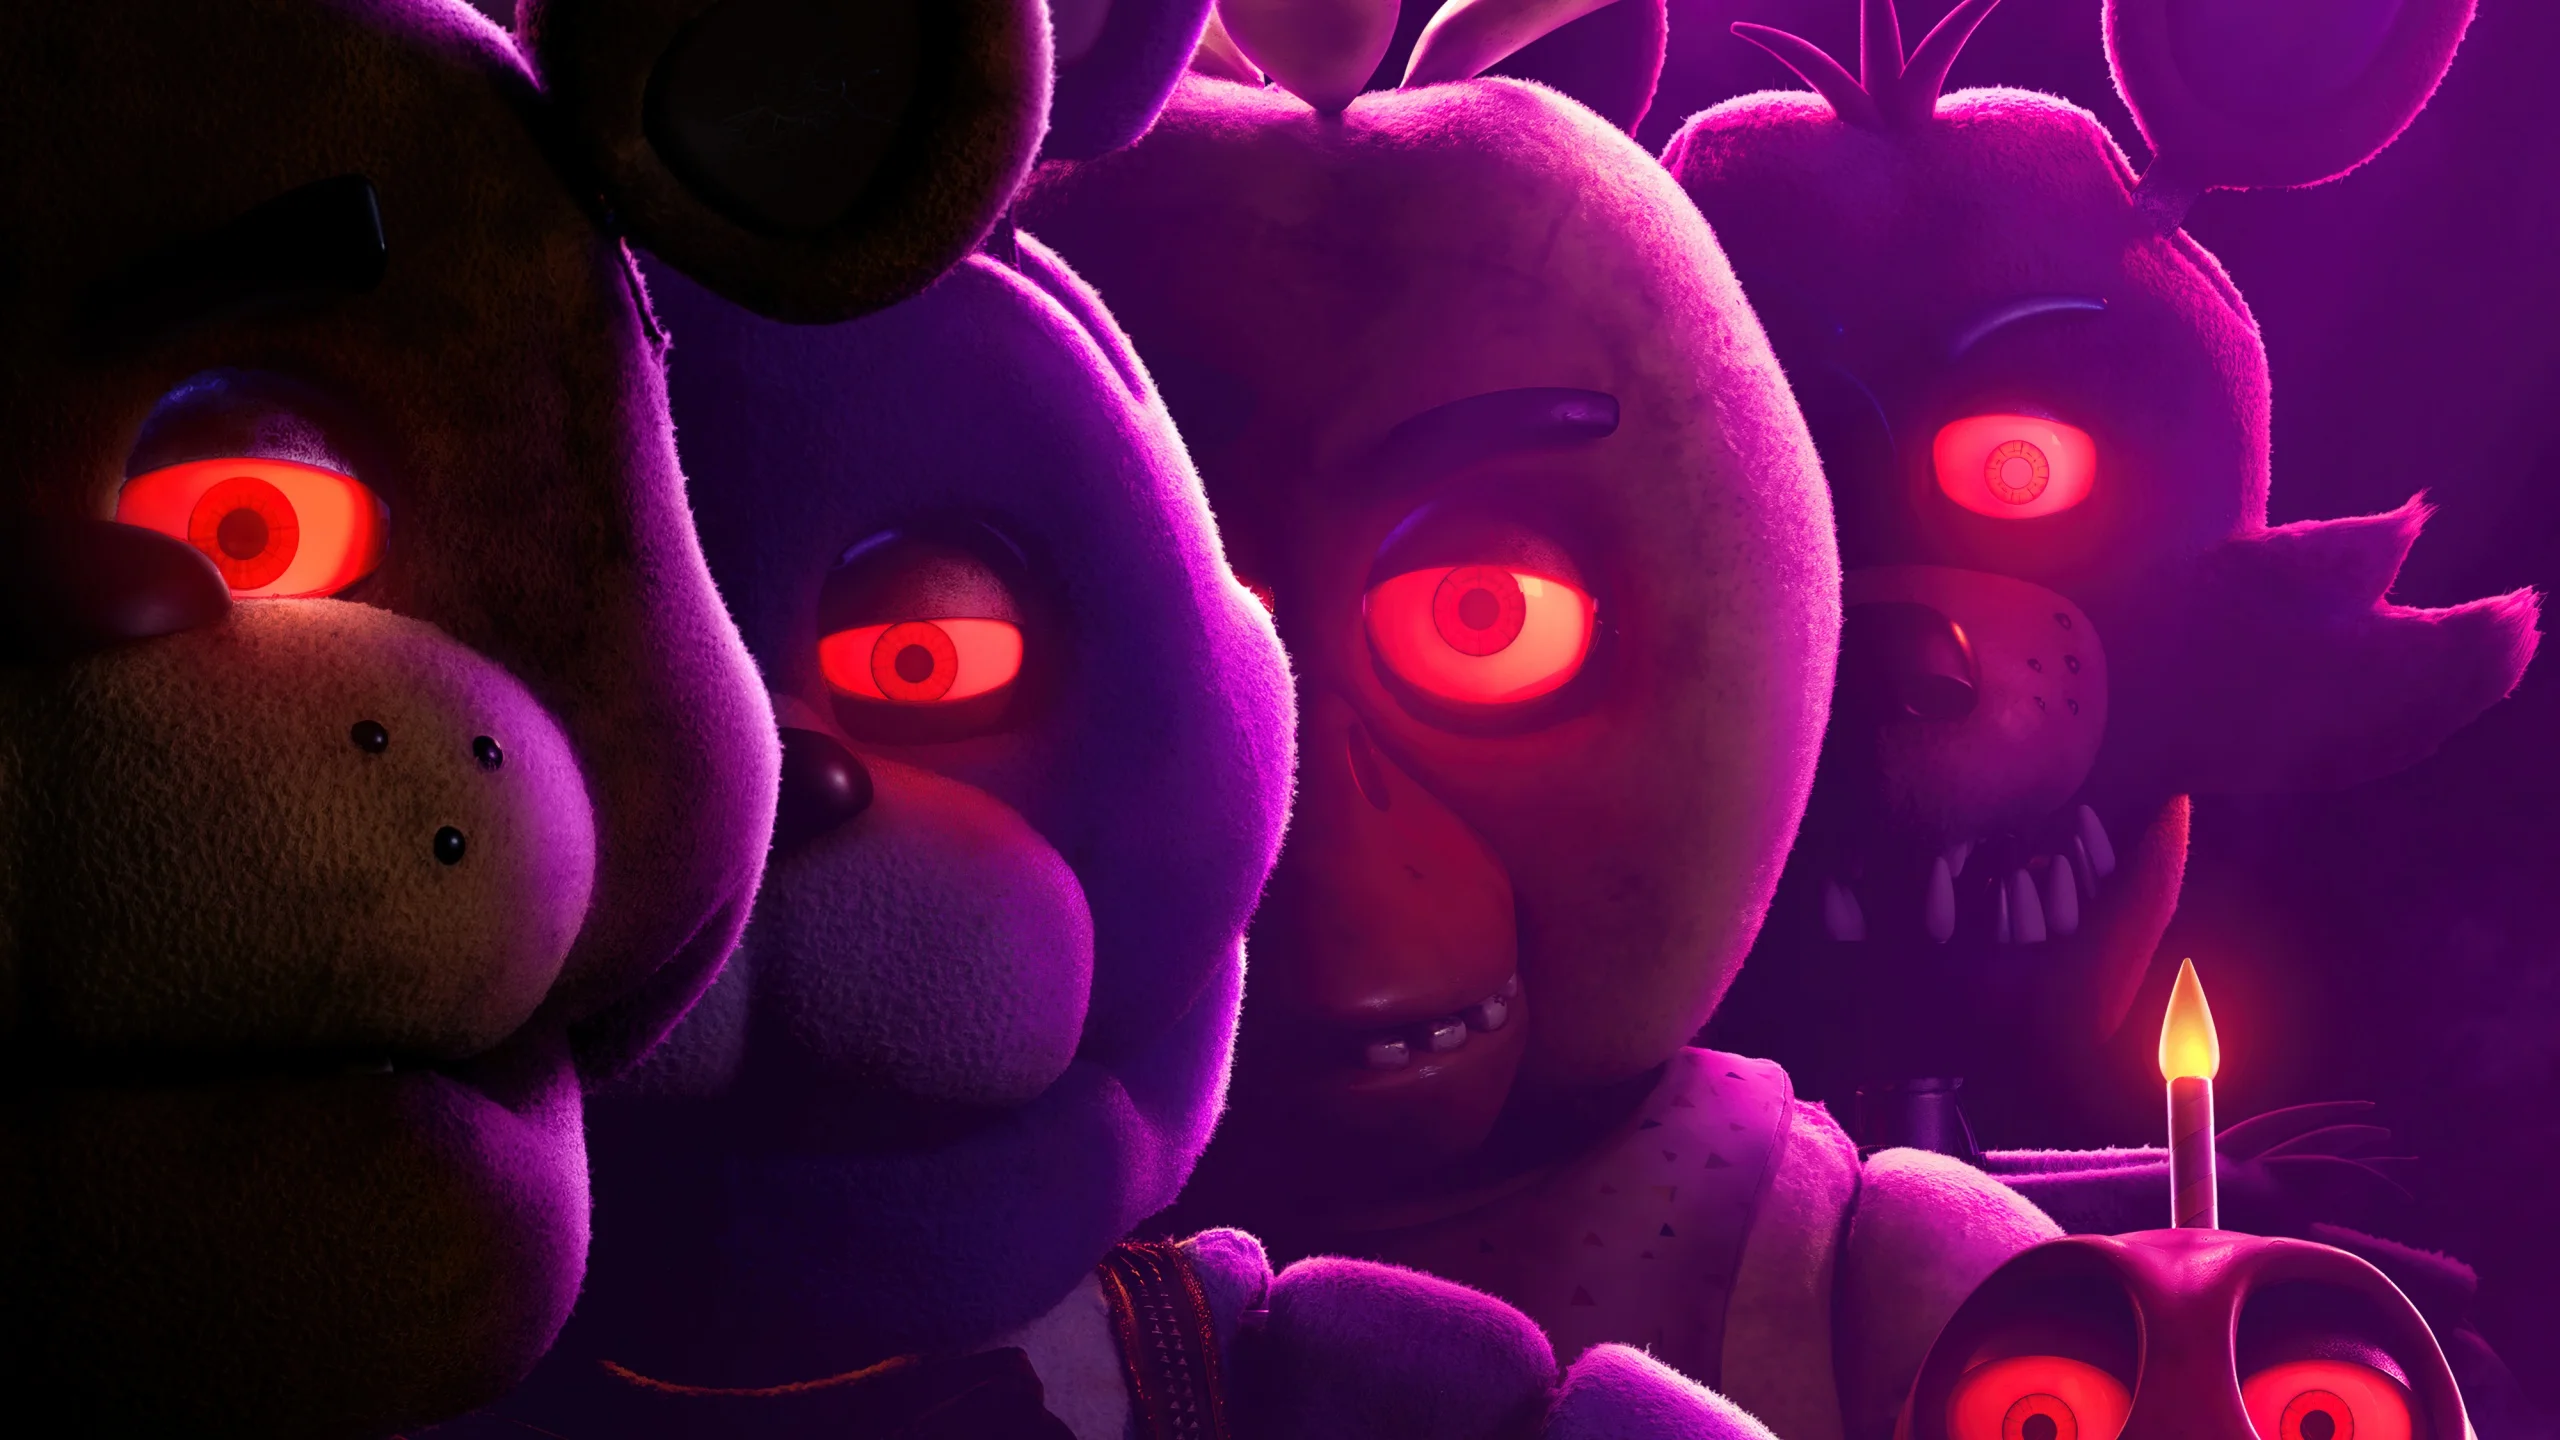 A sequel to the film adaptation of Five Nights at Freddy's has been announced